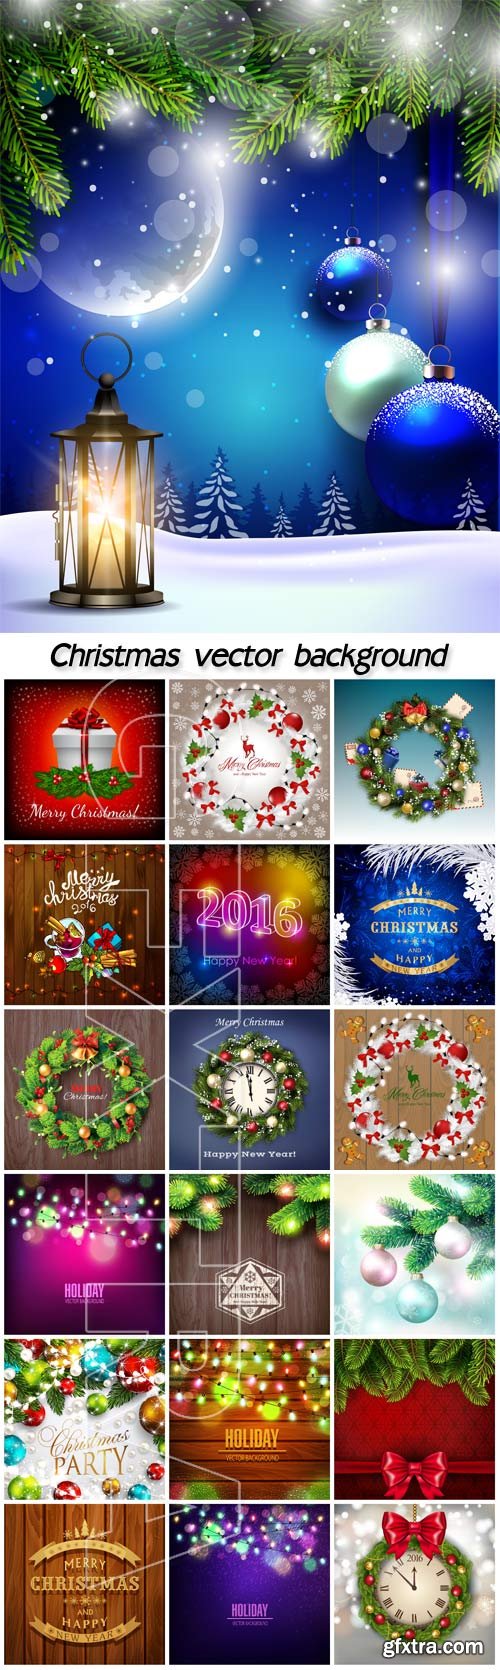 Christmas vector backgrounds with beautiful decorations